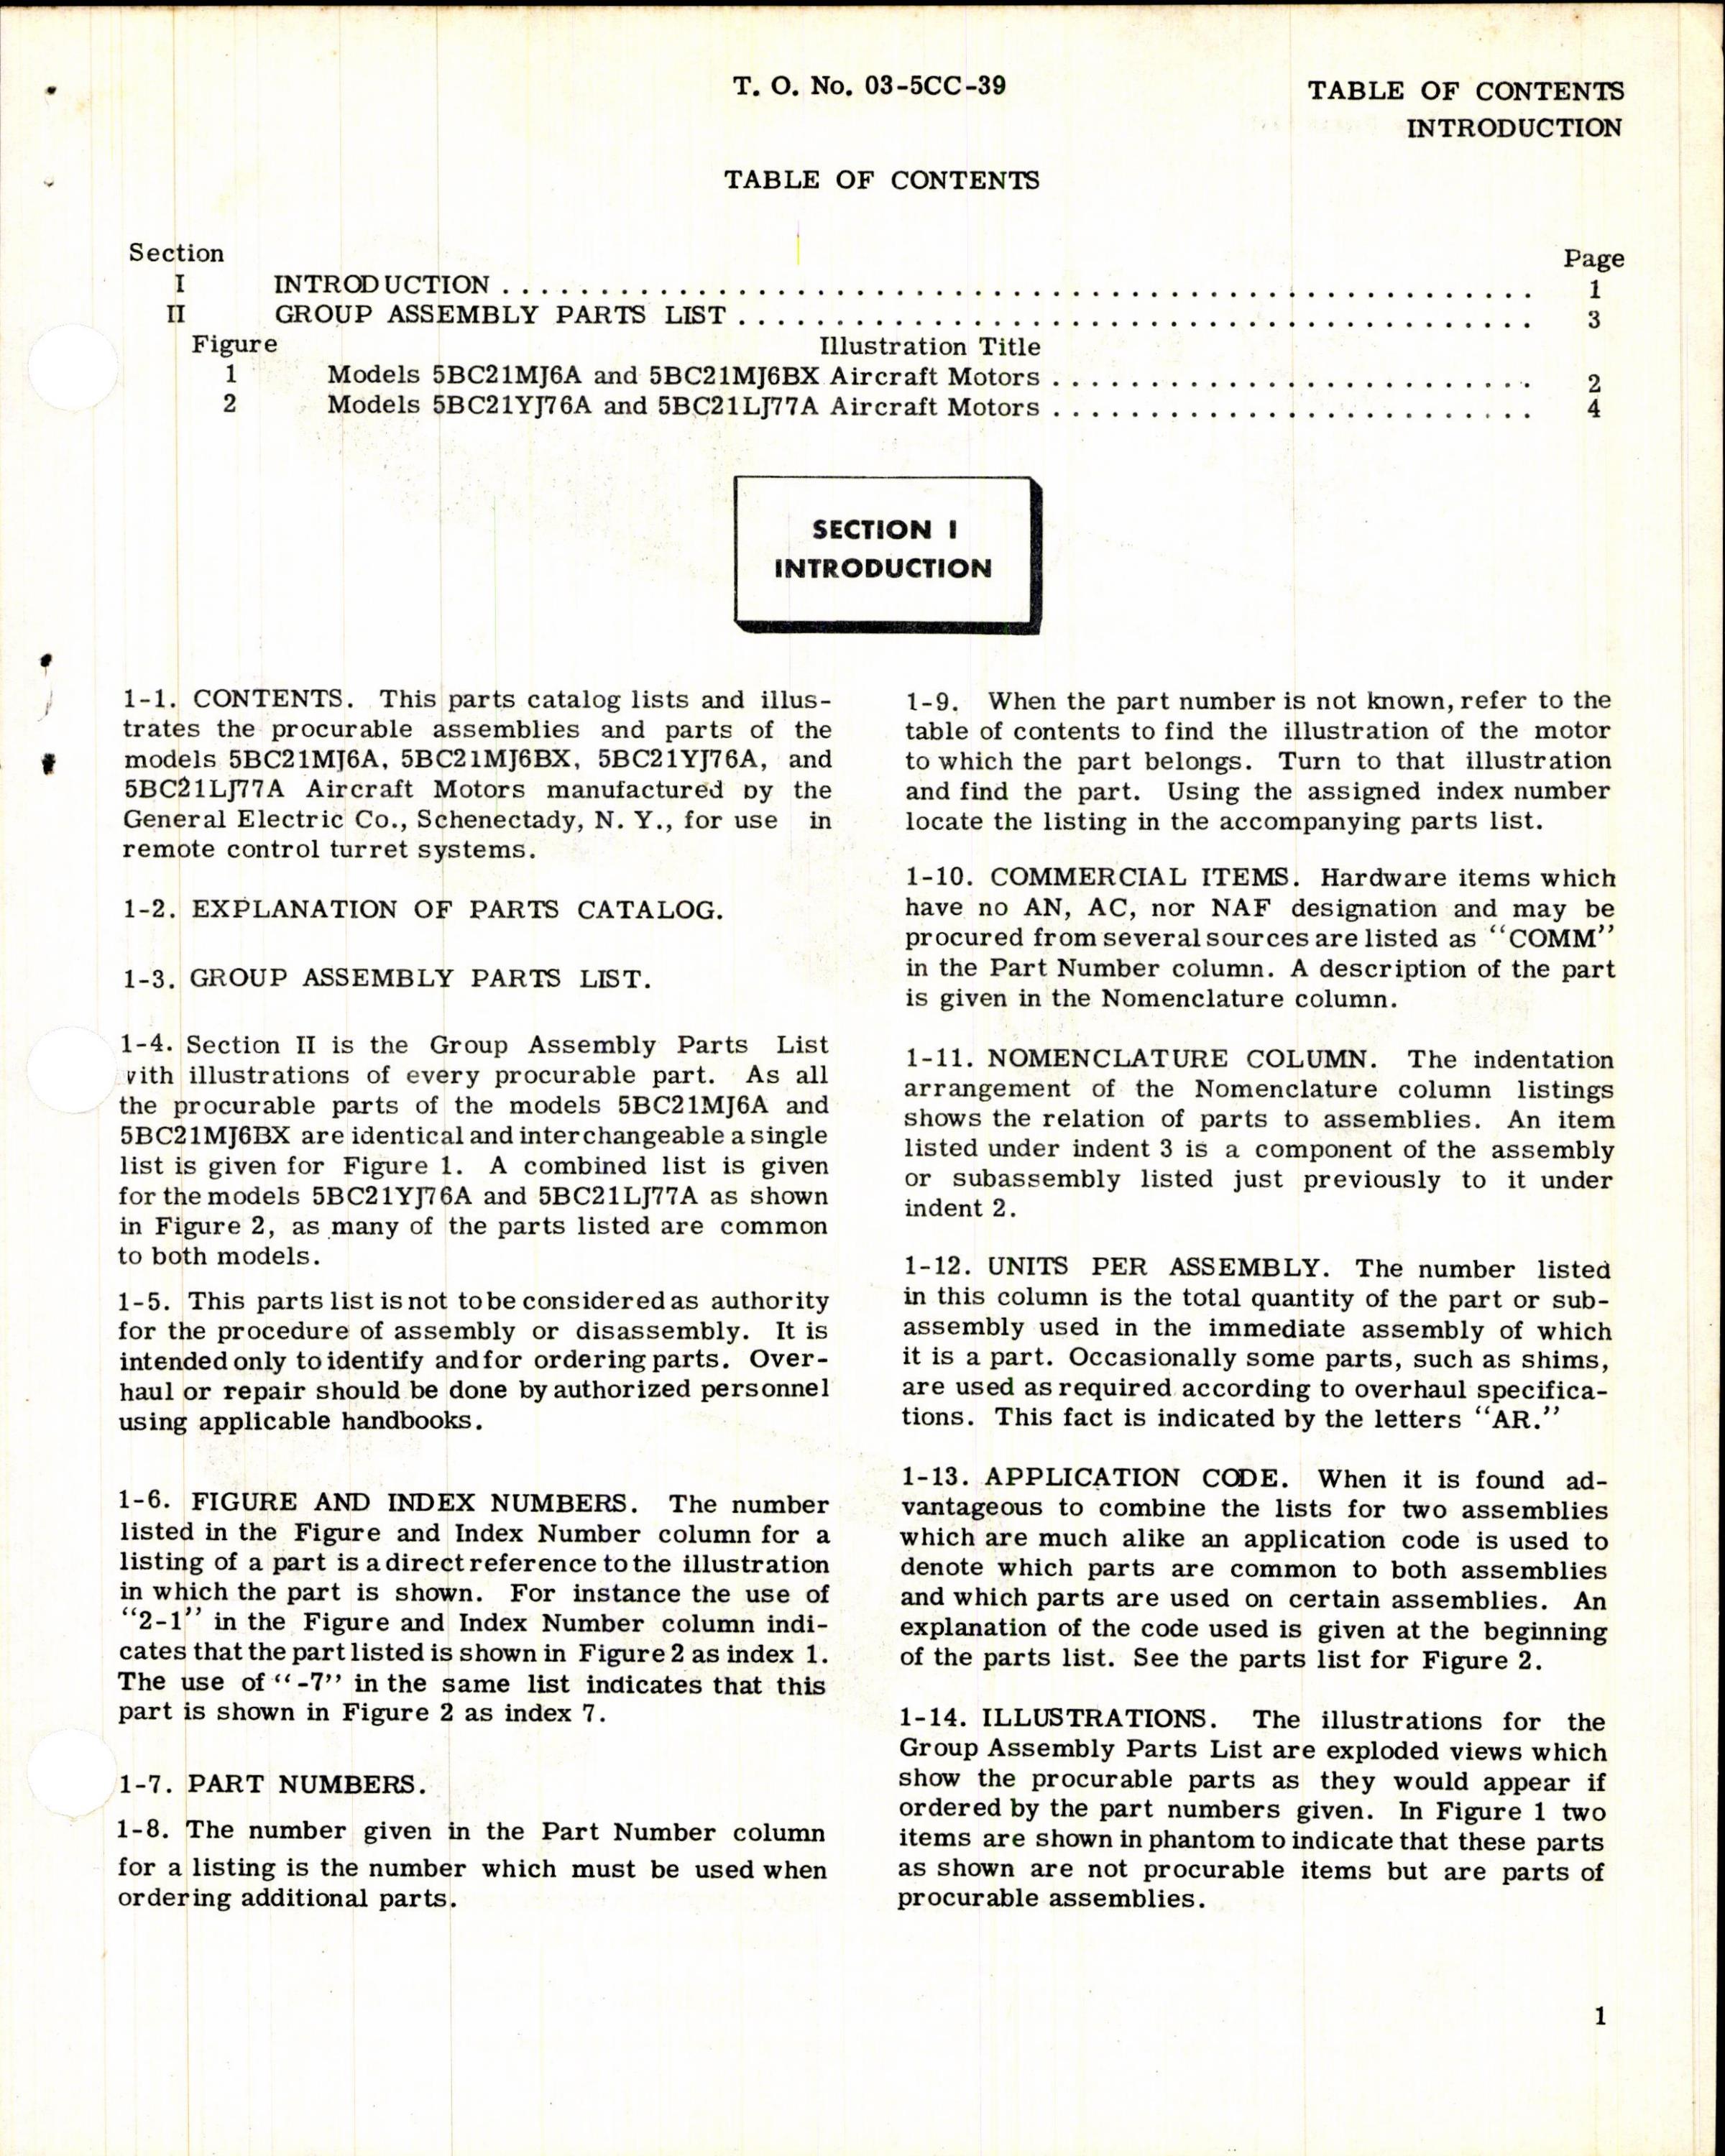 Sample page 3 from AirCorps Library document: Parts Catalog for General Electric Aircraft Motors, Series 5BC21